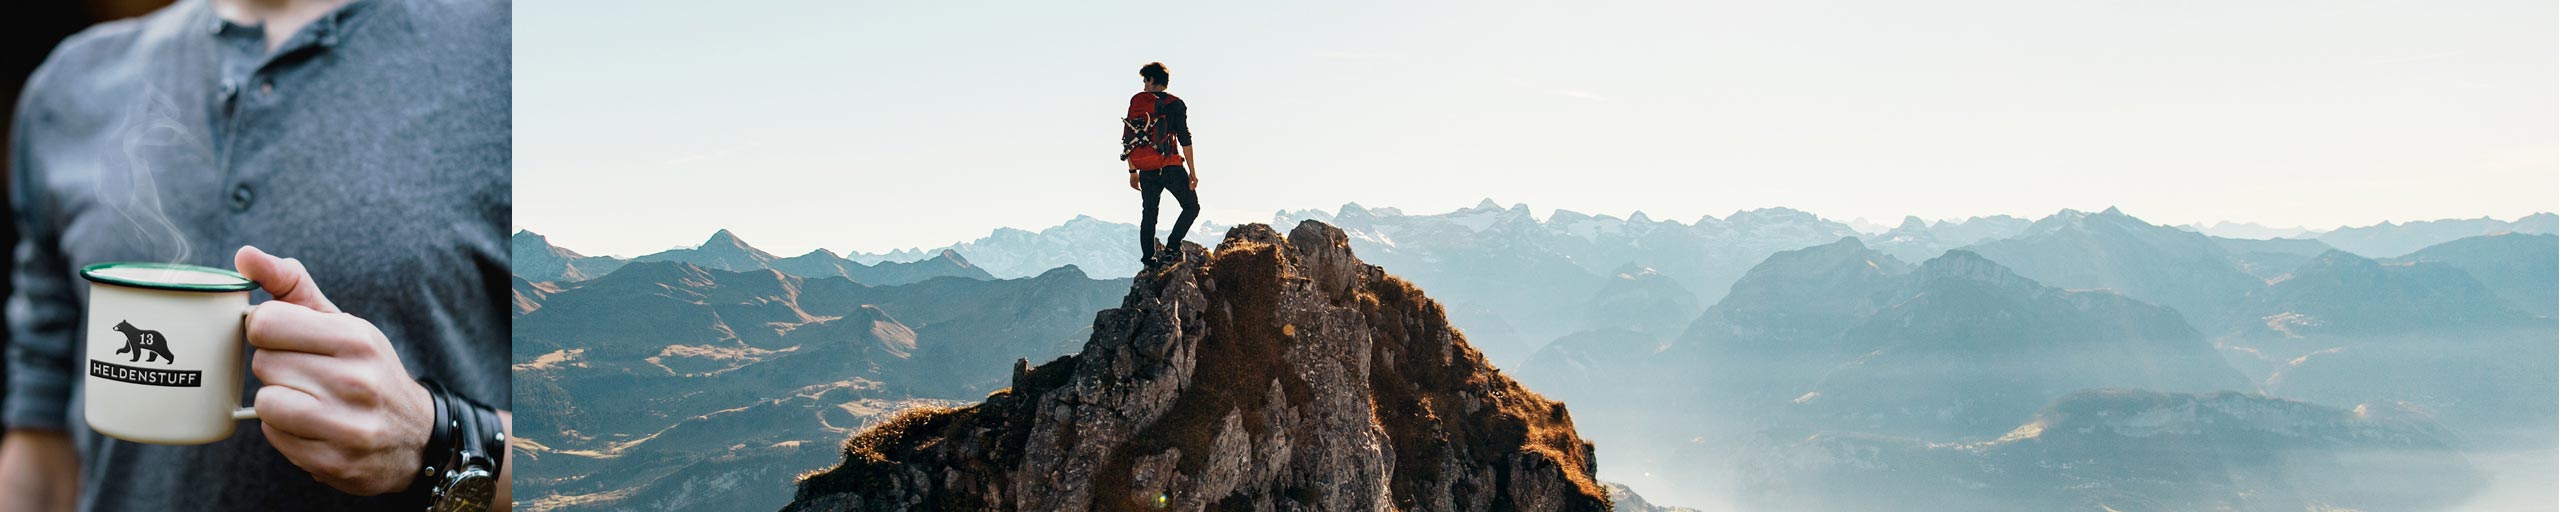 A man with a backpack summiting a mountain and enjoying the panorama.